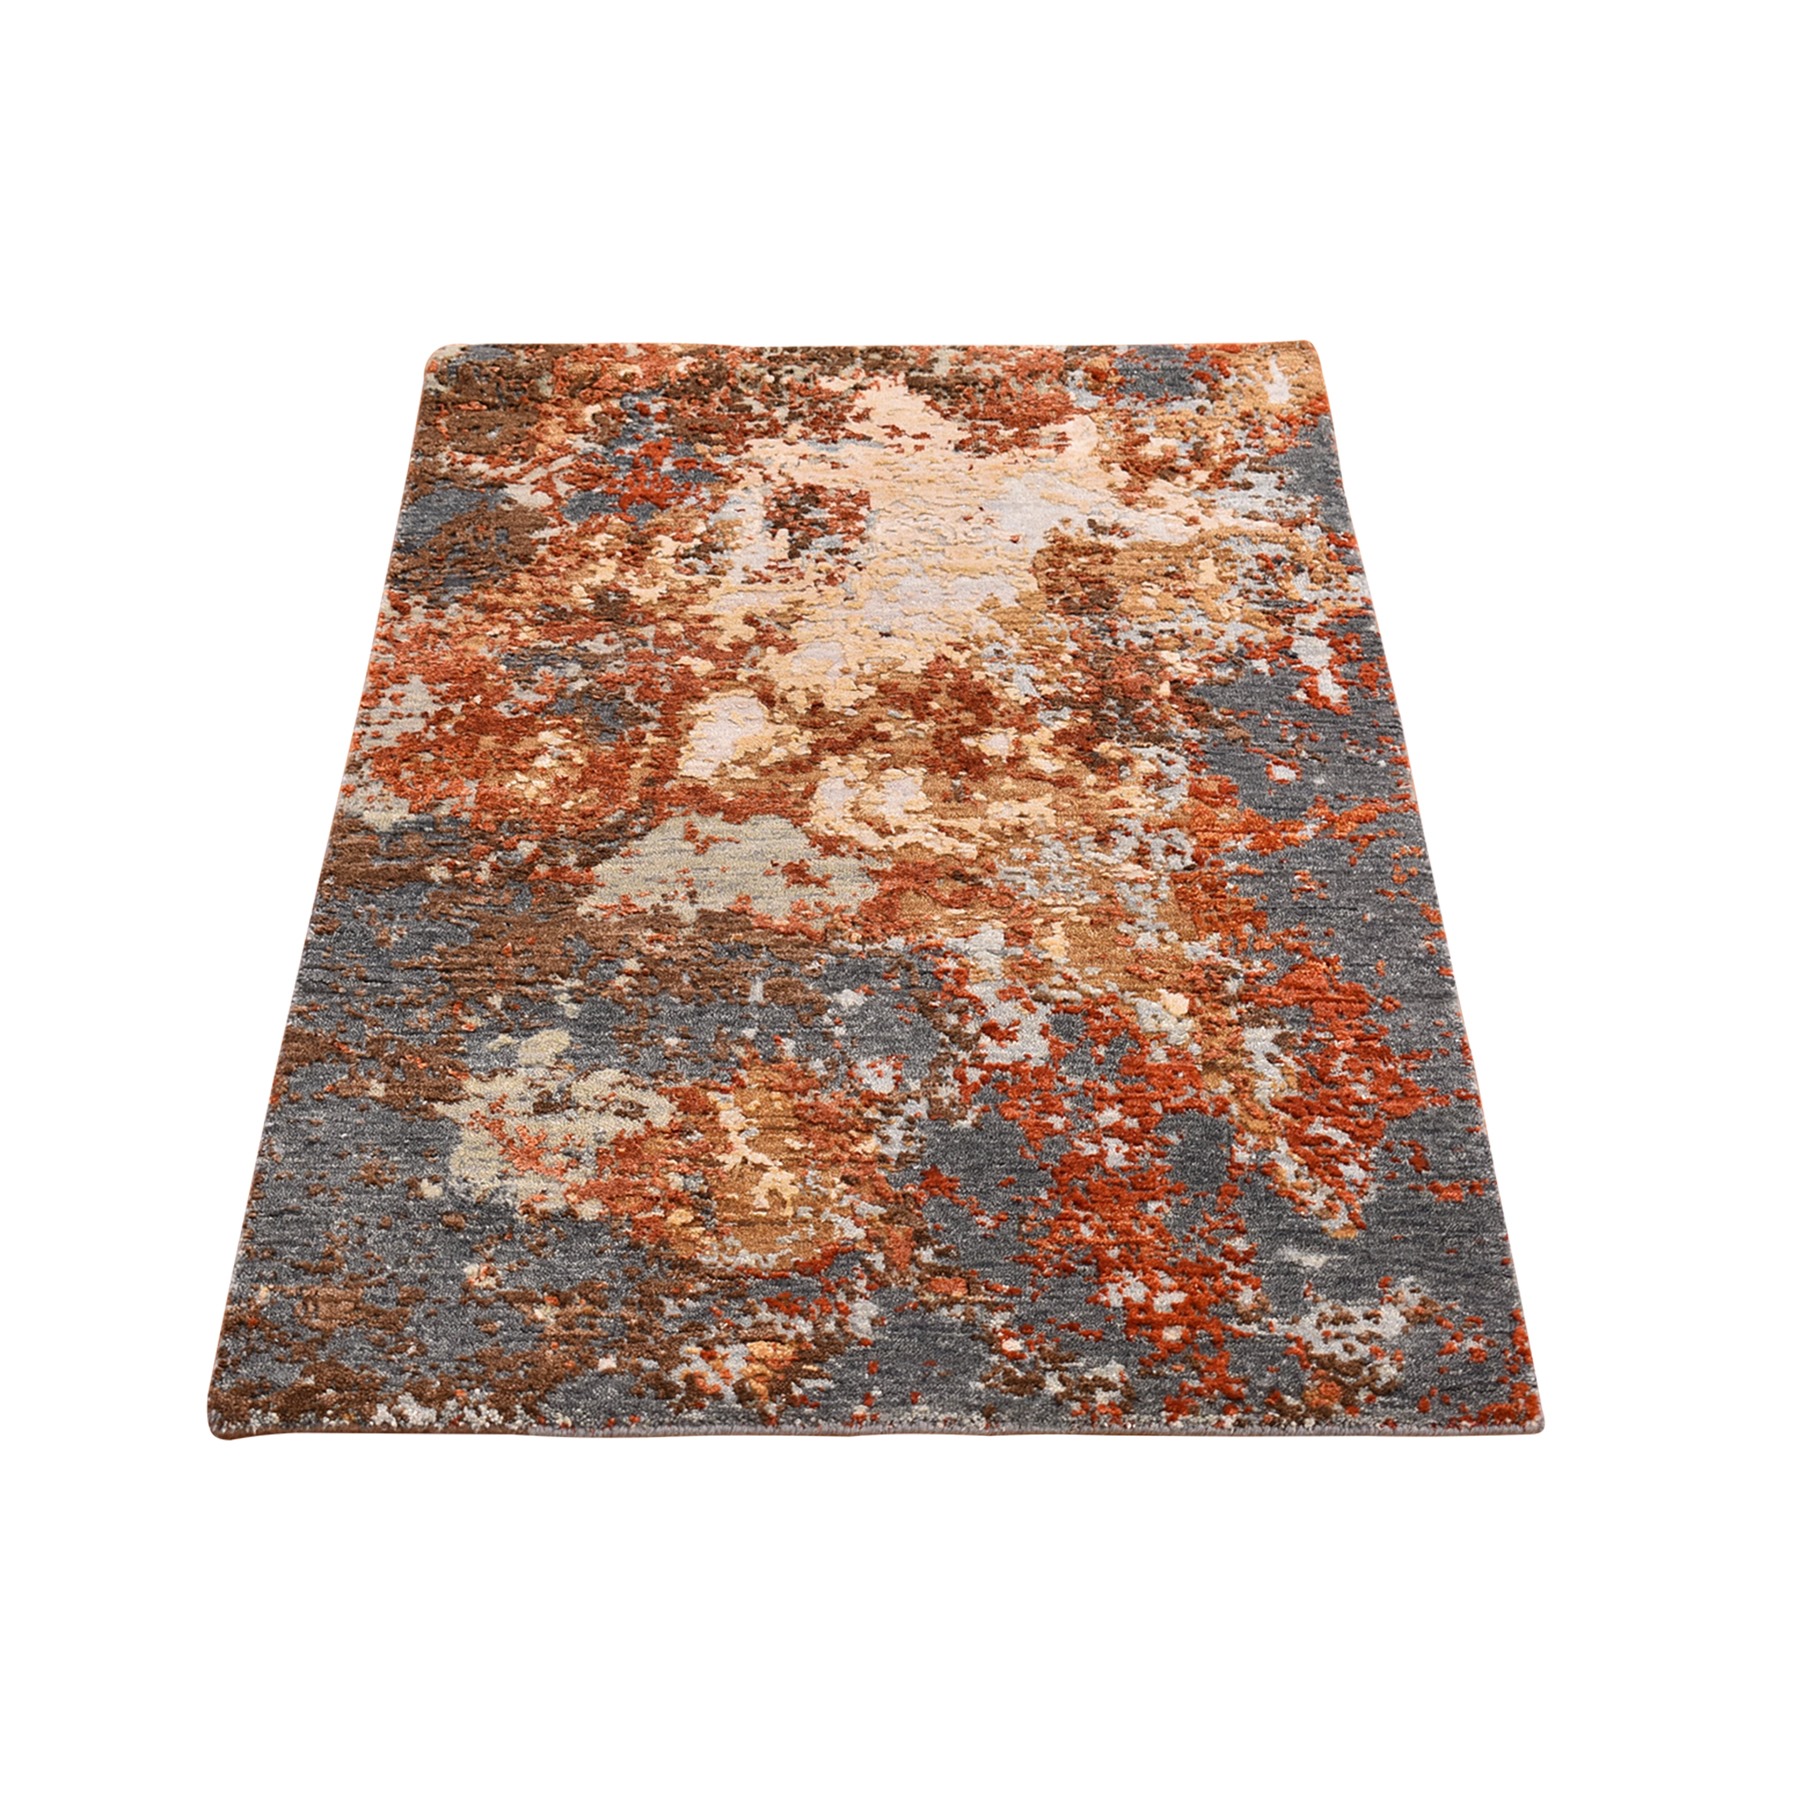 2'6"x4'1" Gray Abstract Design Wool and Silk Hi-Low Pile Denser Weave Hand Woven Oriental Rug 